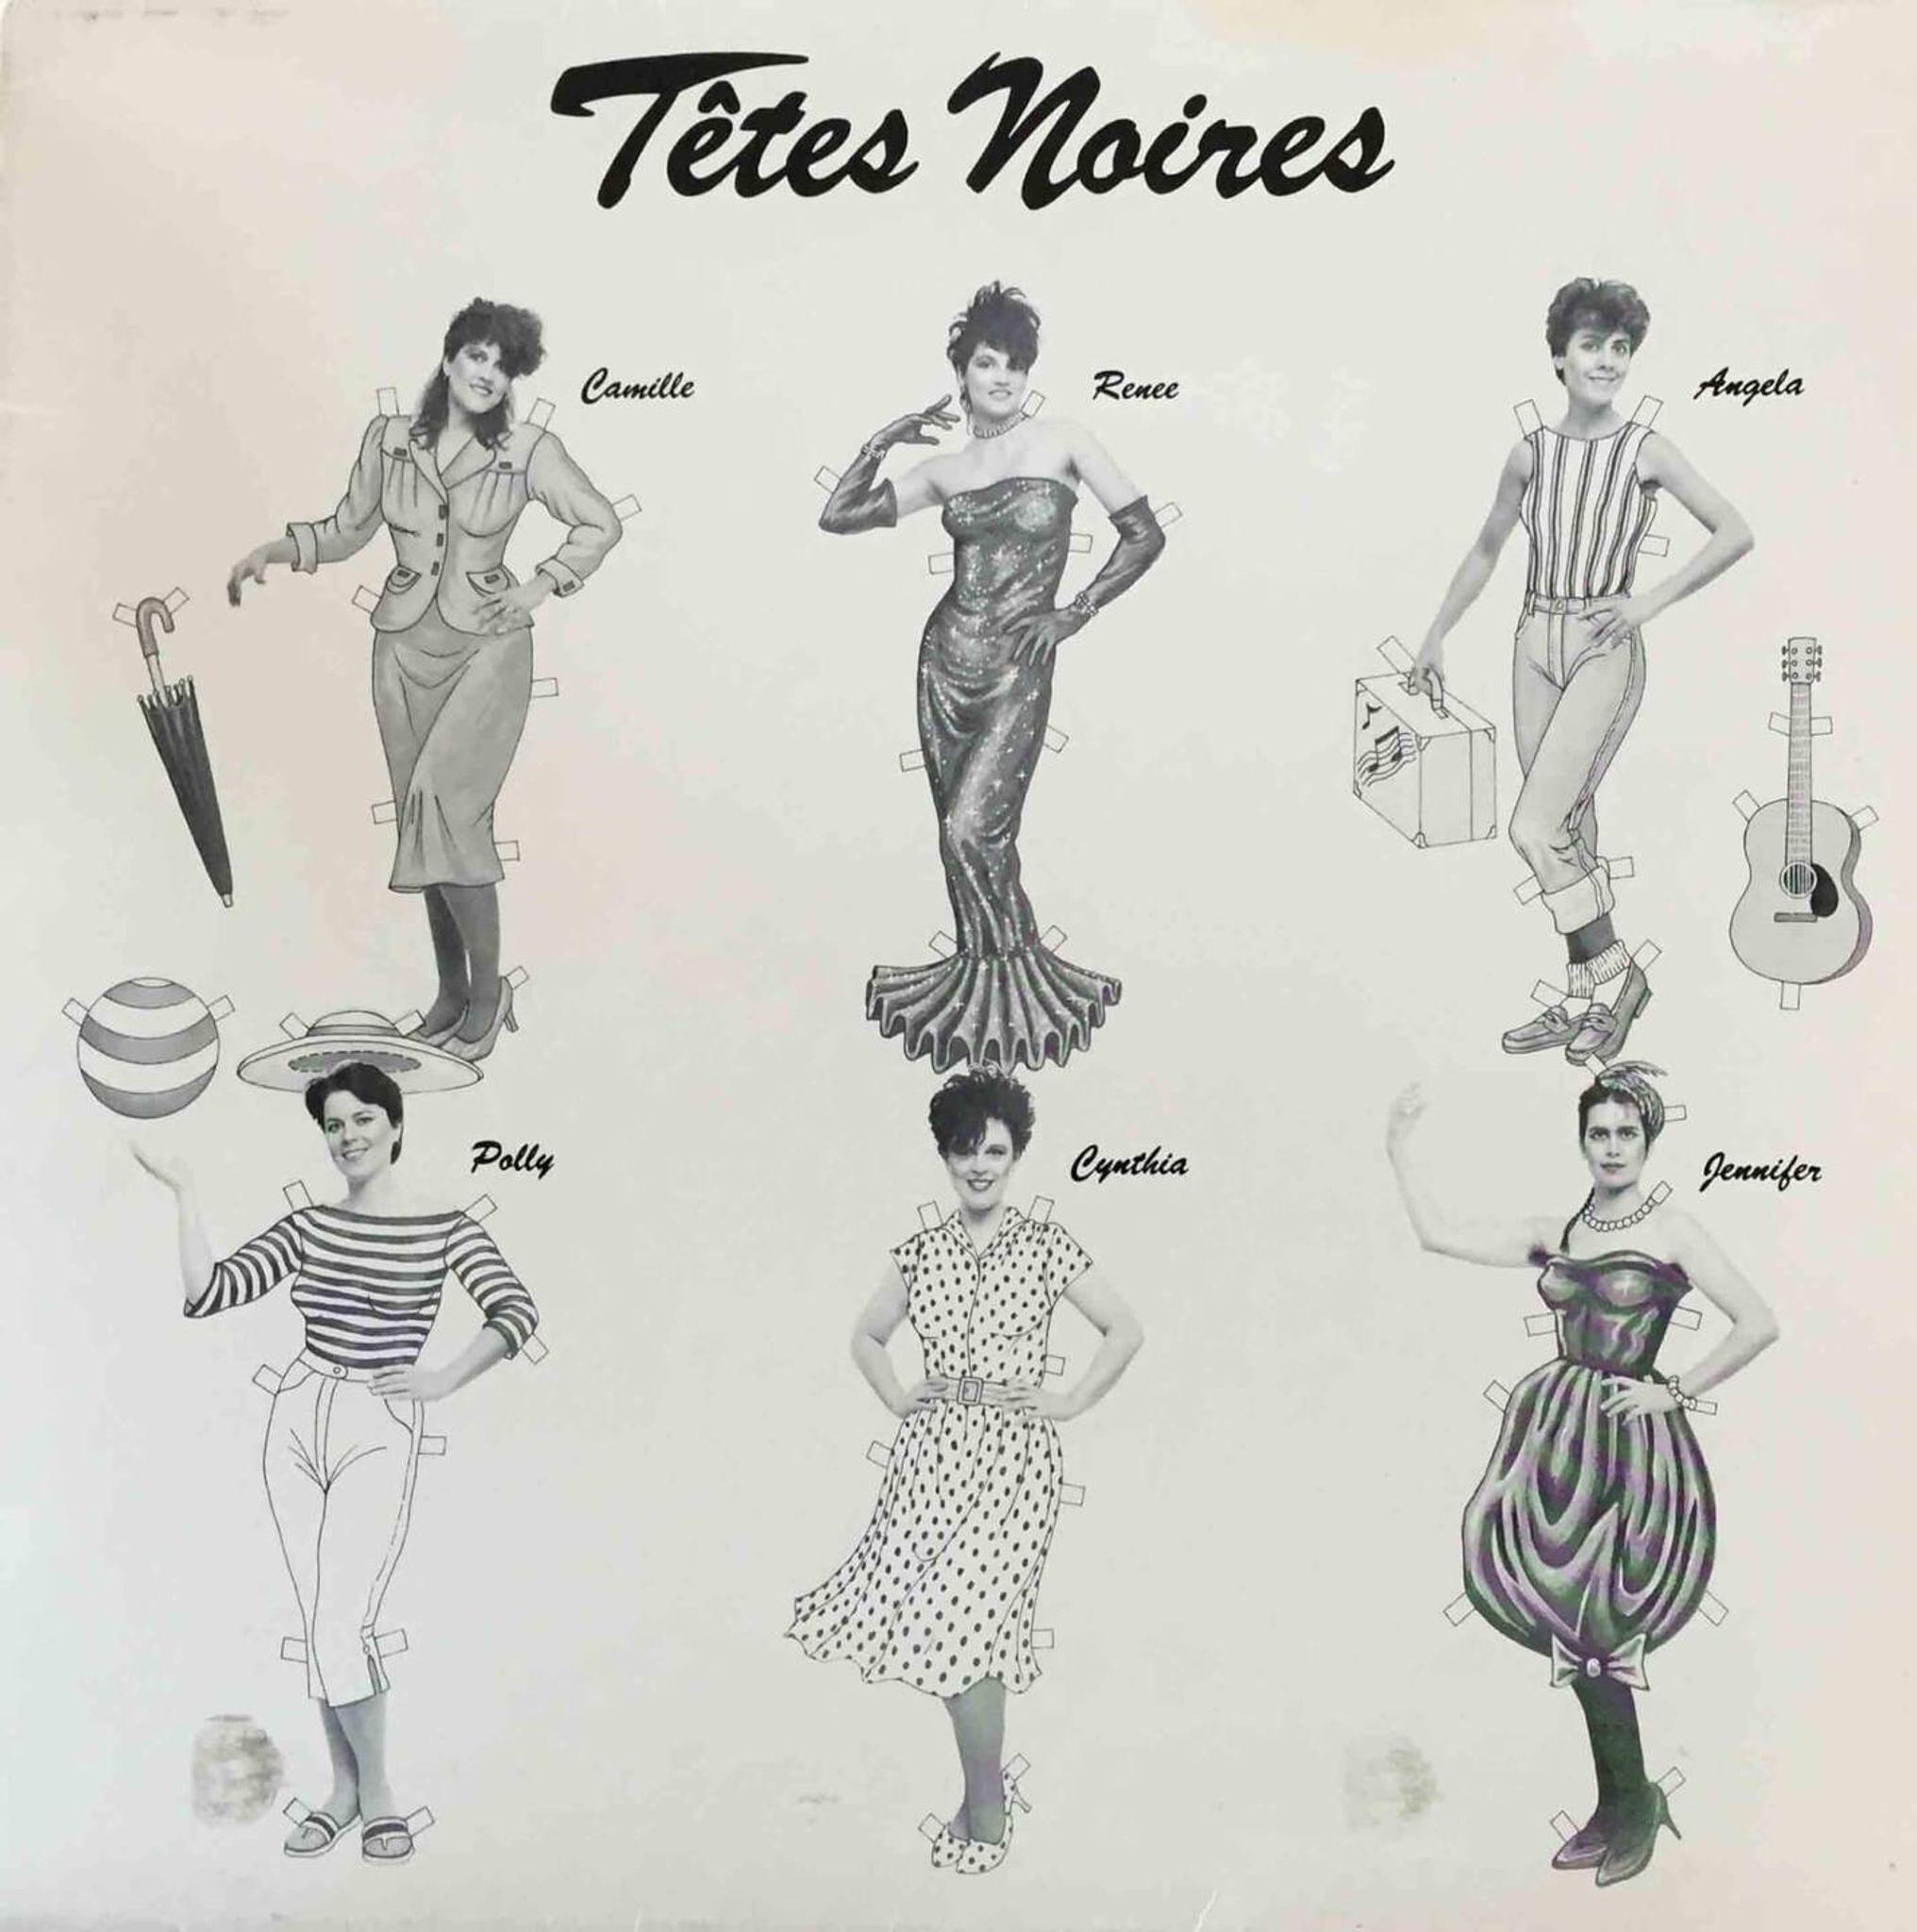 Têtes Noires' first EP cover, which caught the eye of New York booking agent Joe Brauner and led to the band landing a national booking contract with Riley Management.